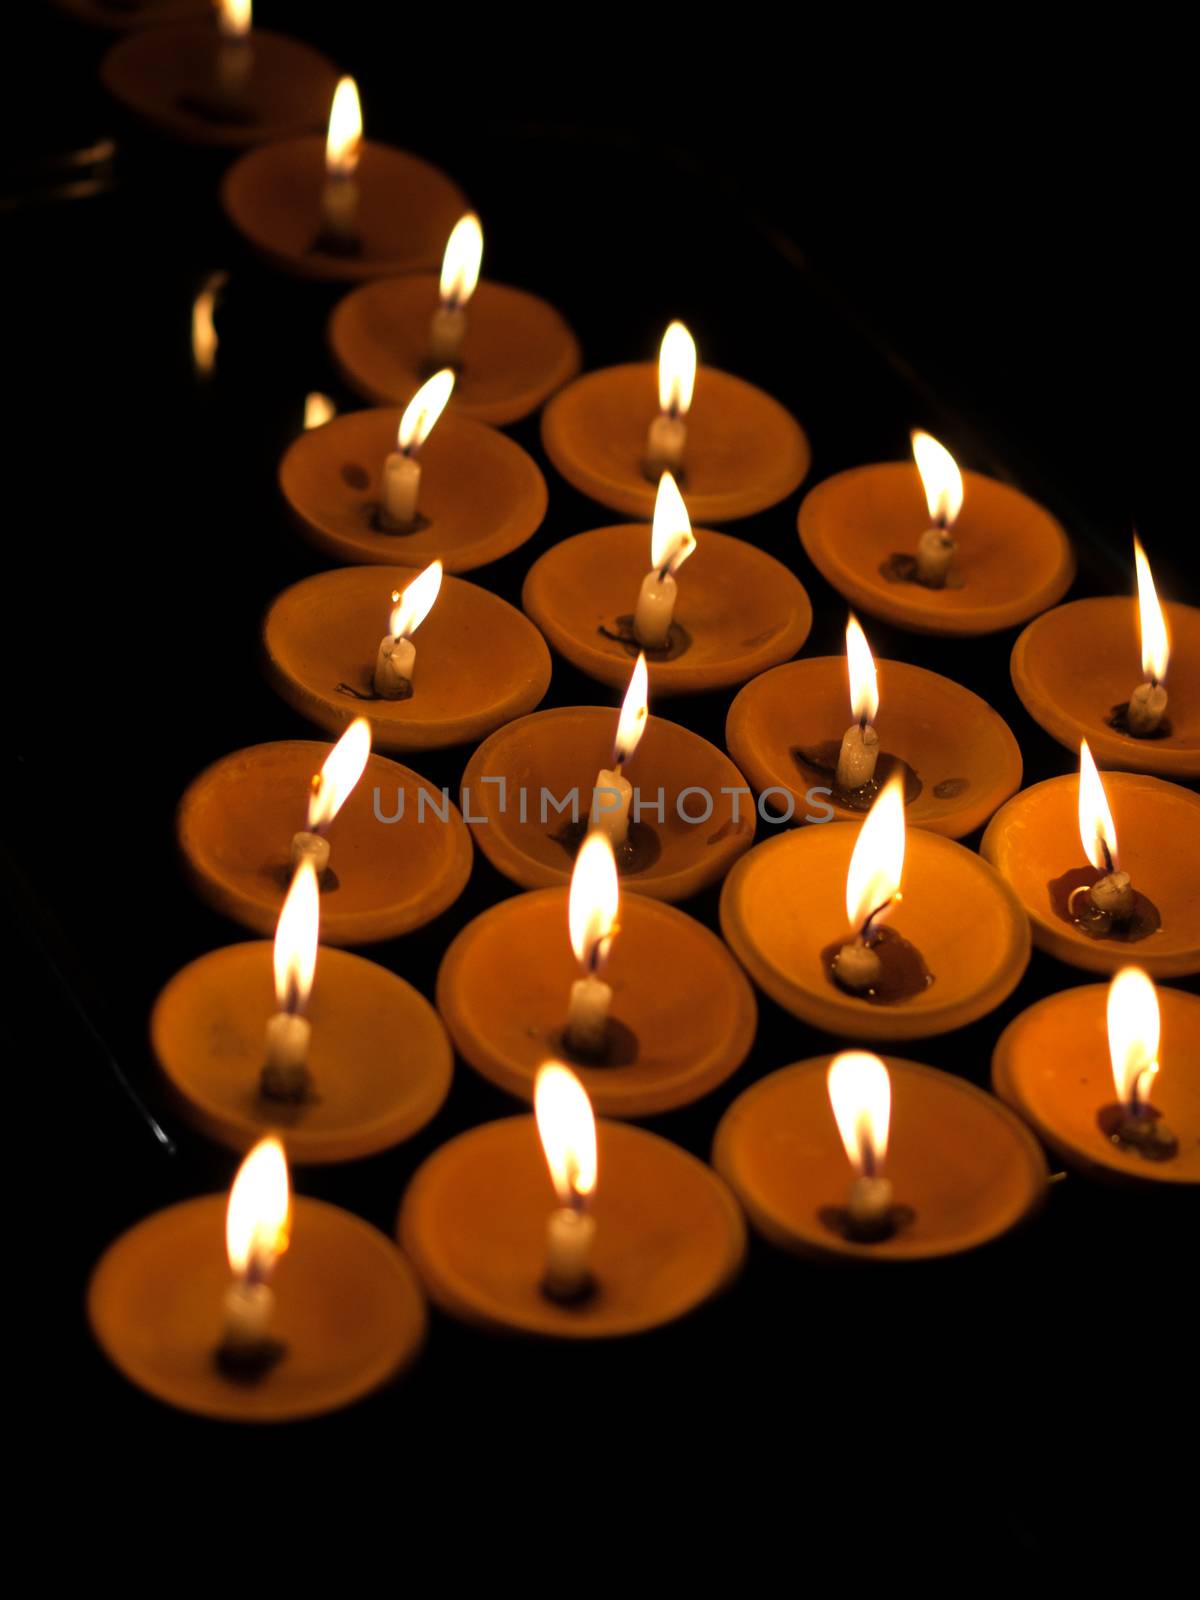 COLOR PHOTO OF OFFERING LIT CANDLES